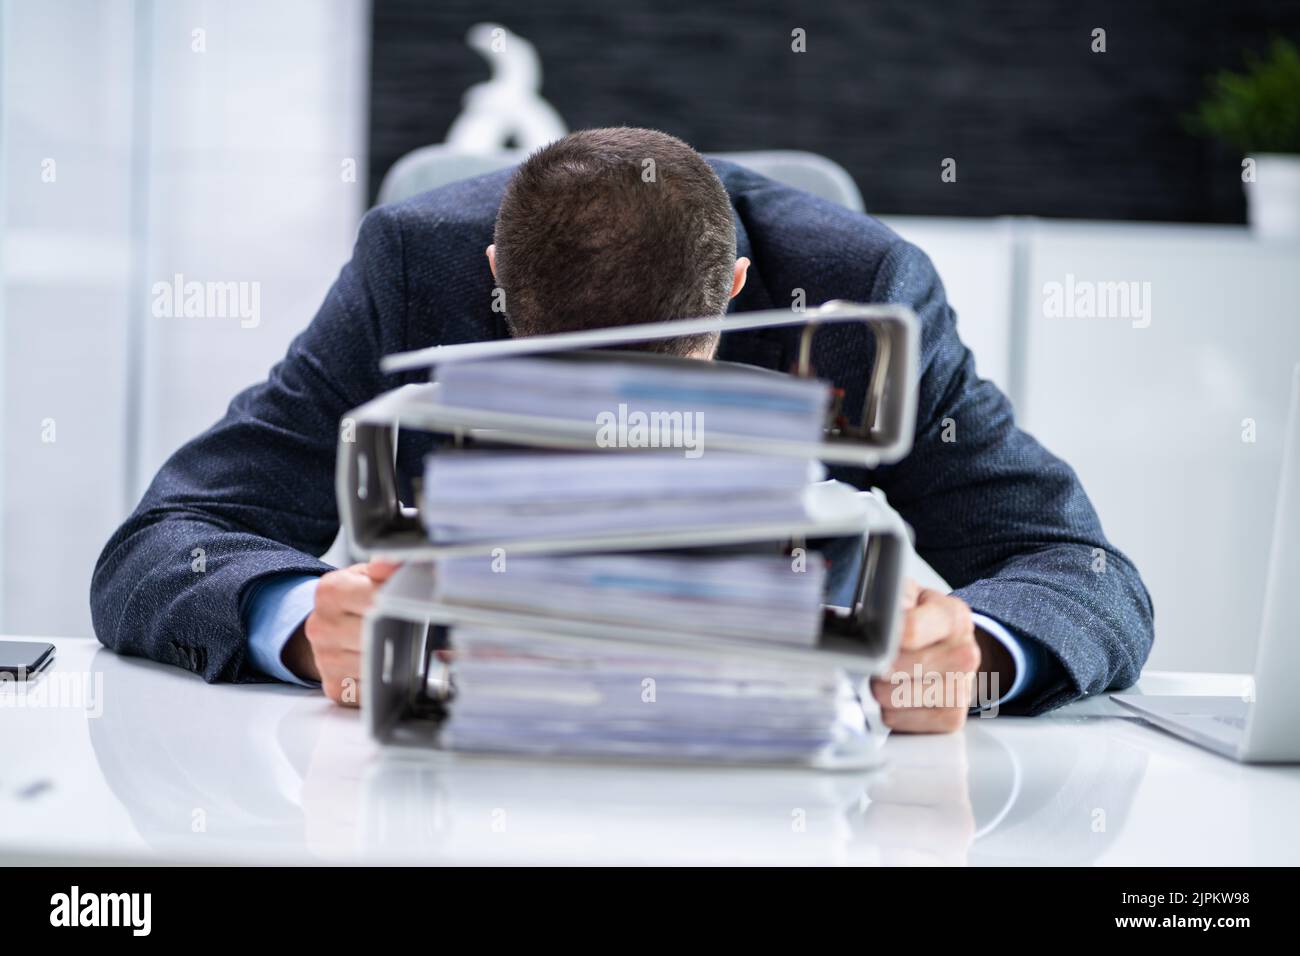 Tired Sad Man Overworked In Office Accounting Stress Stock Photo Alamy